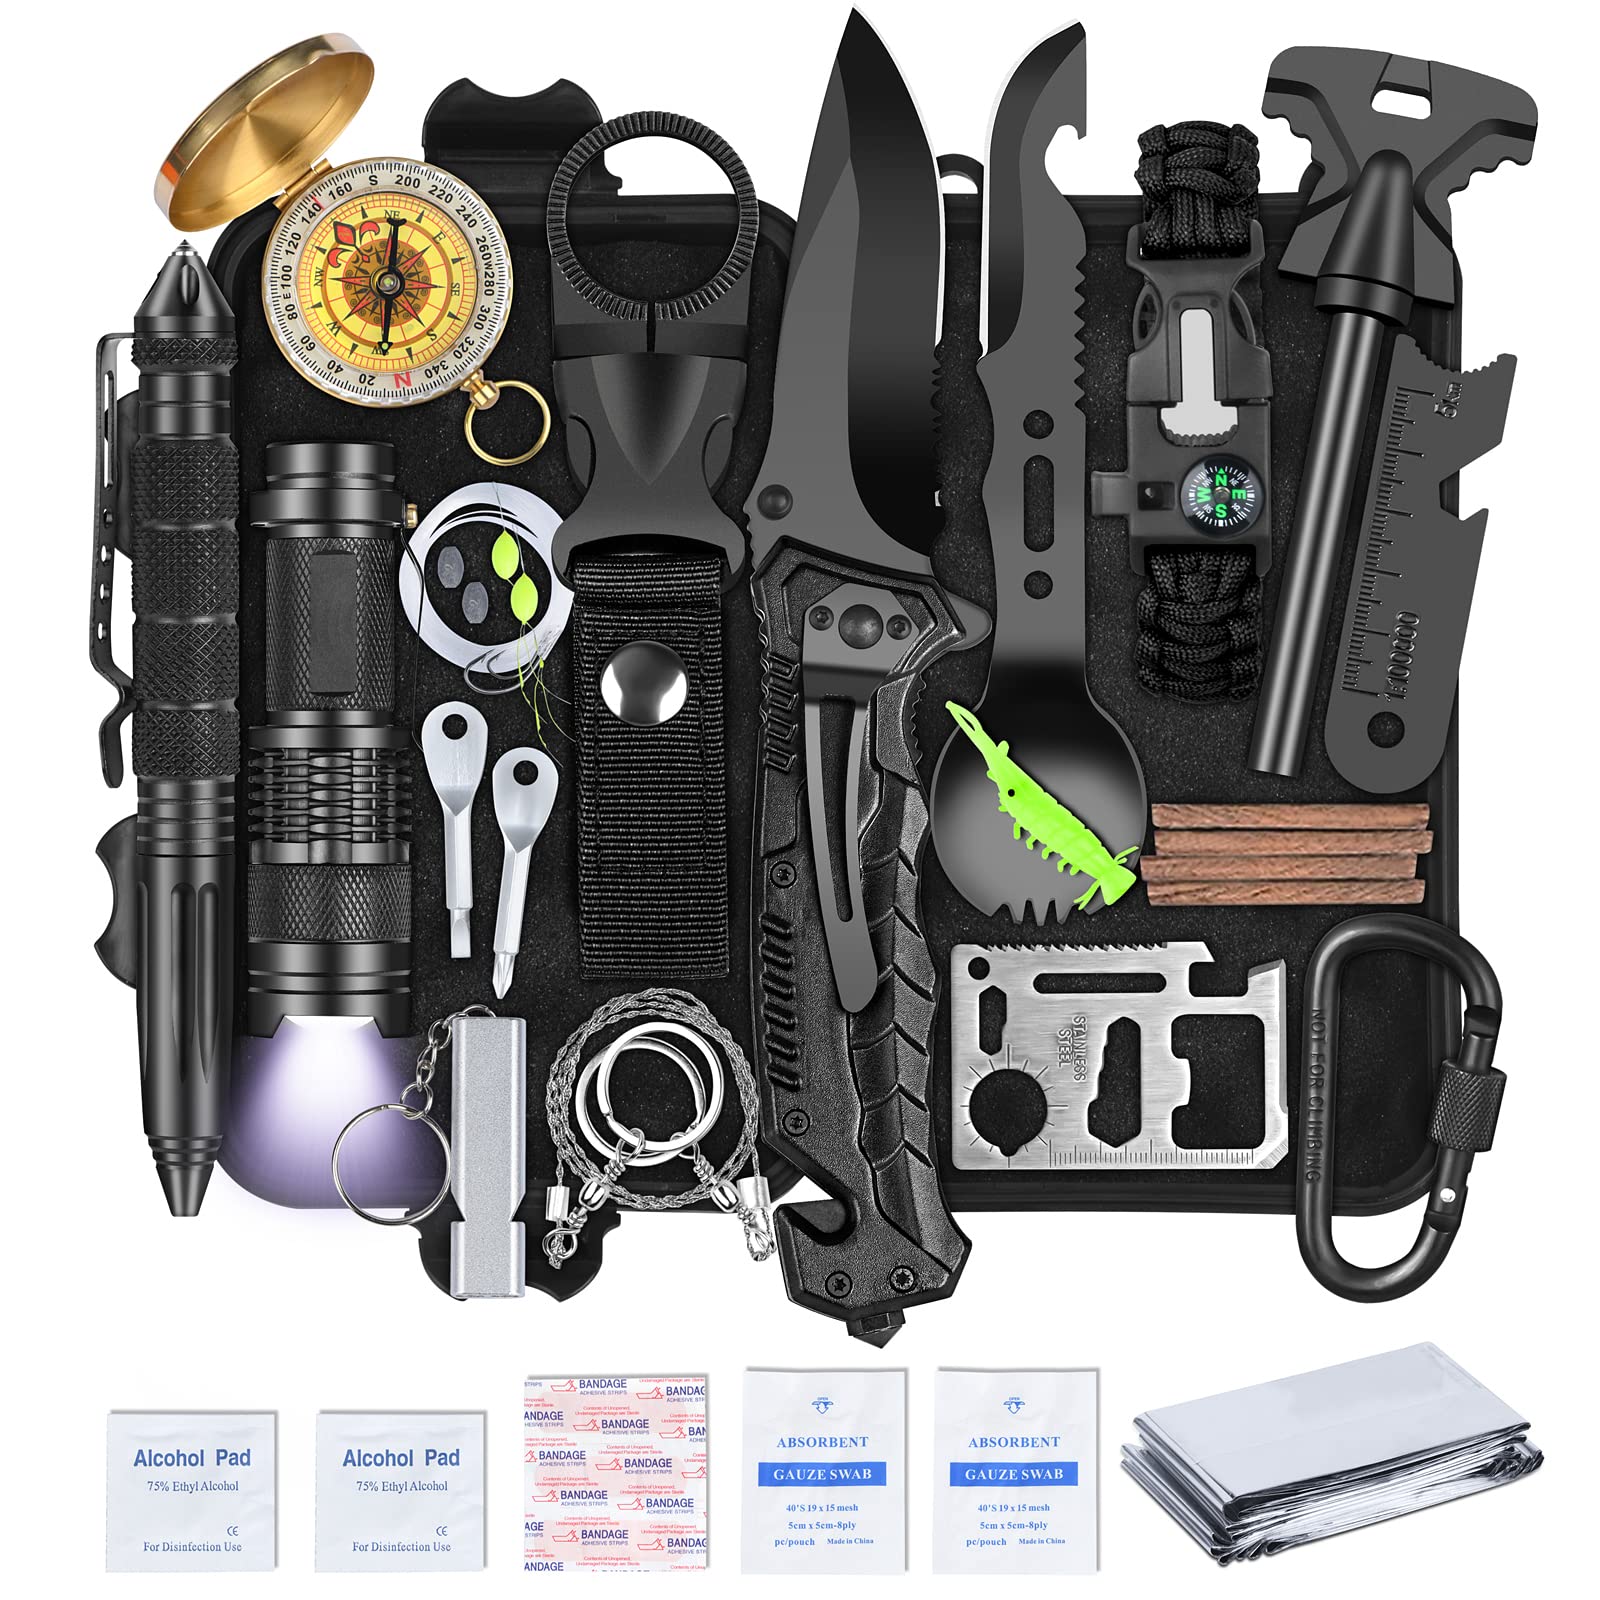 Gifts for Men Dad Husband, Survival Kits, Emergency Survival Gear and  Equipment, Fishing Hunting Birthday for Men, Camping Accessories, Cool  Gadget